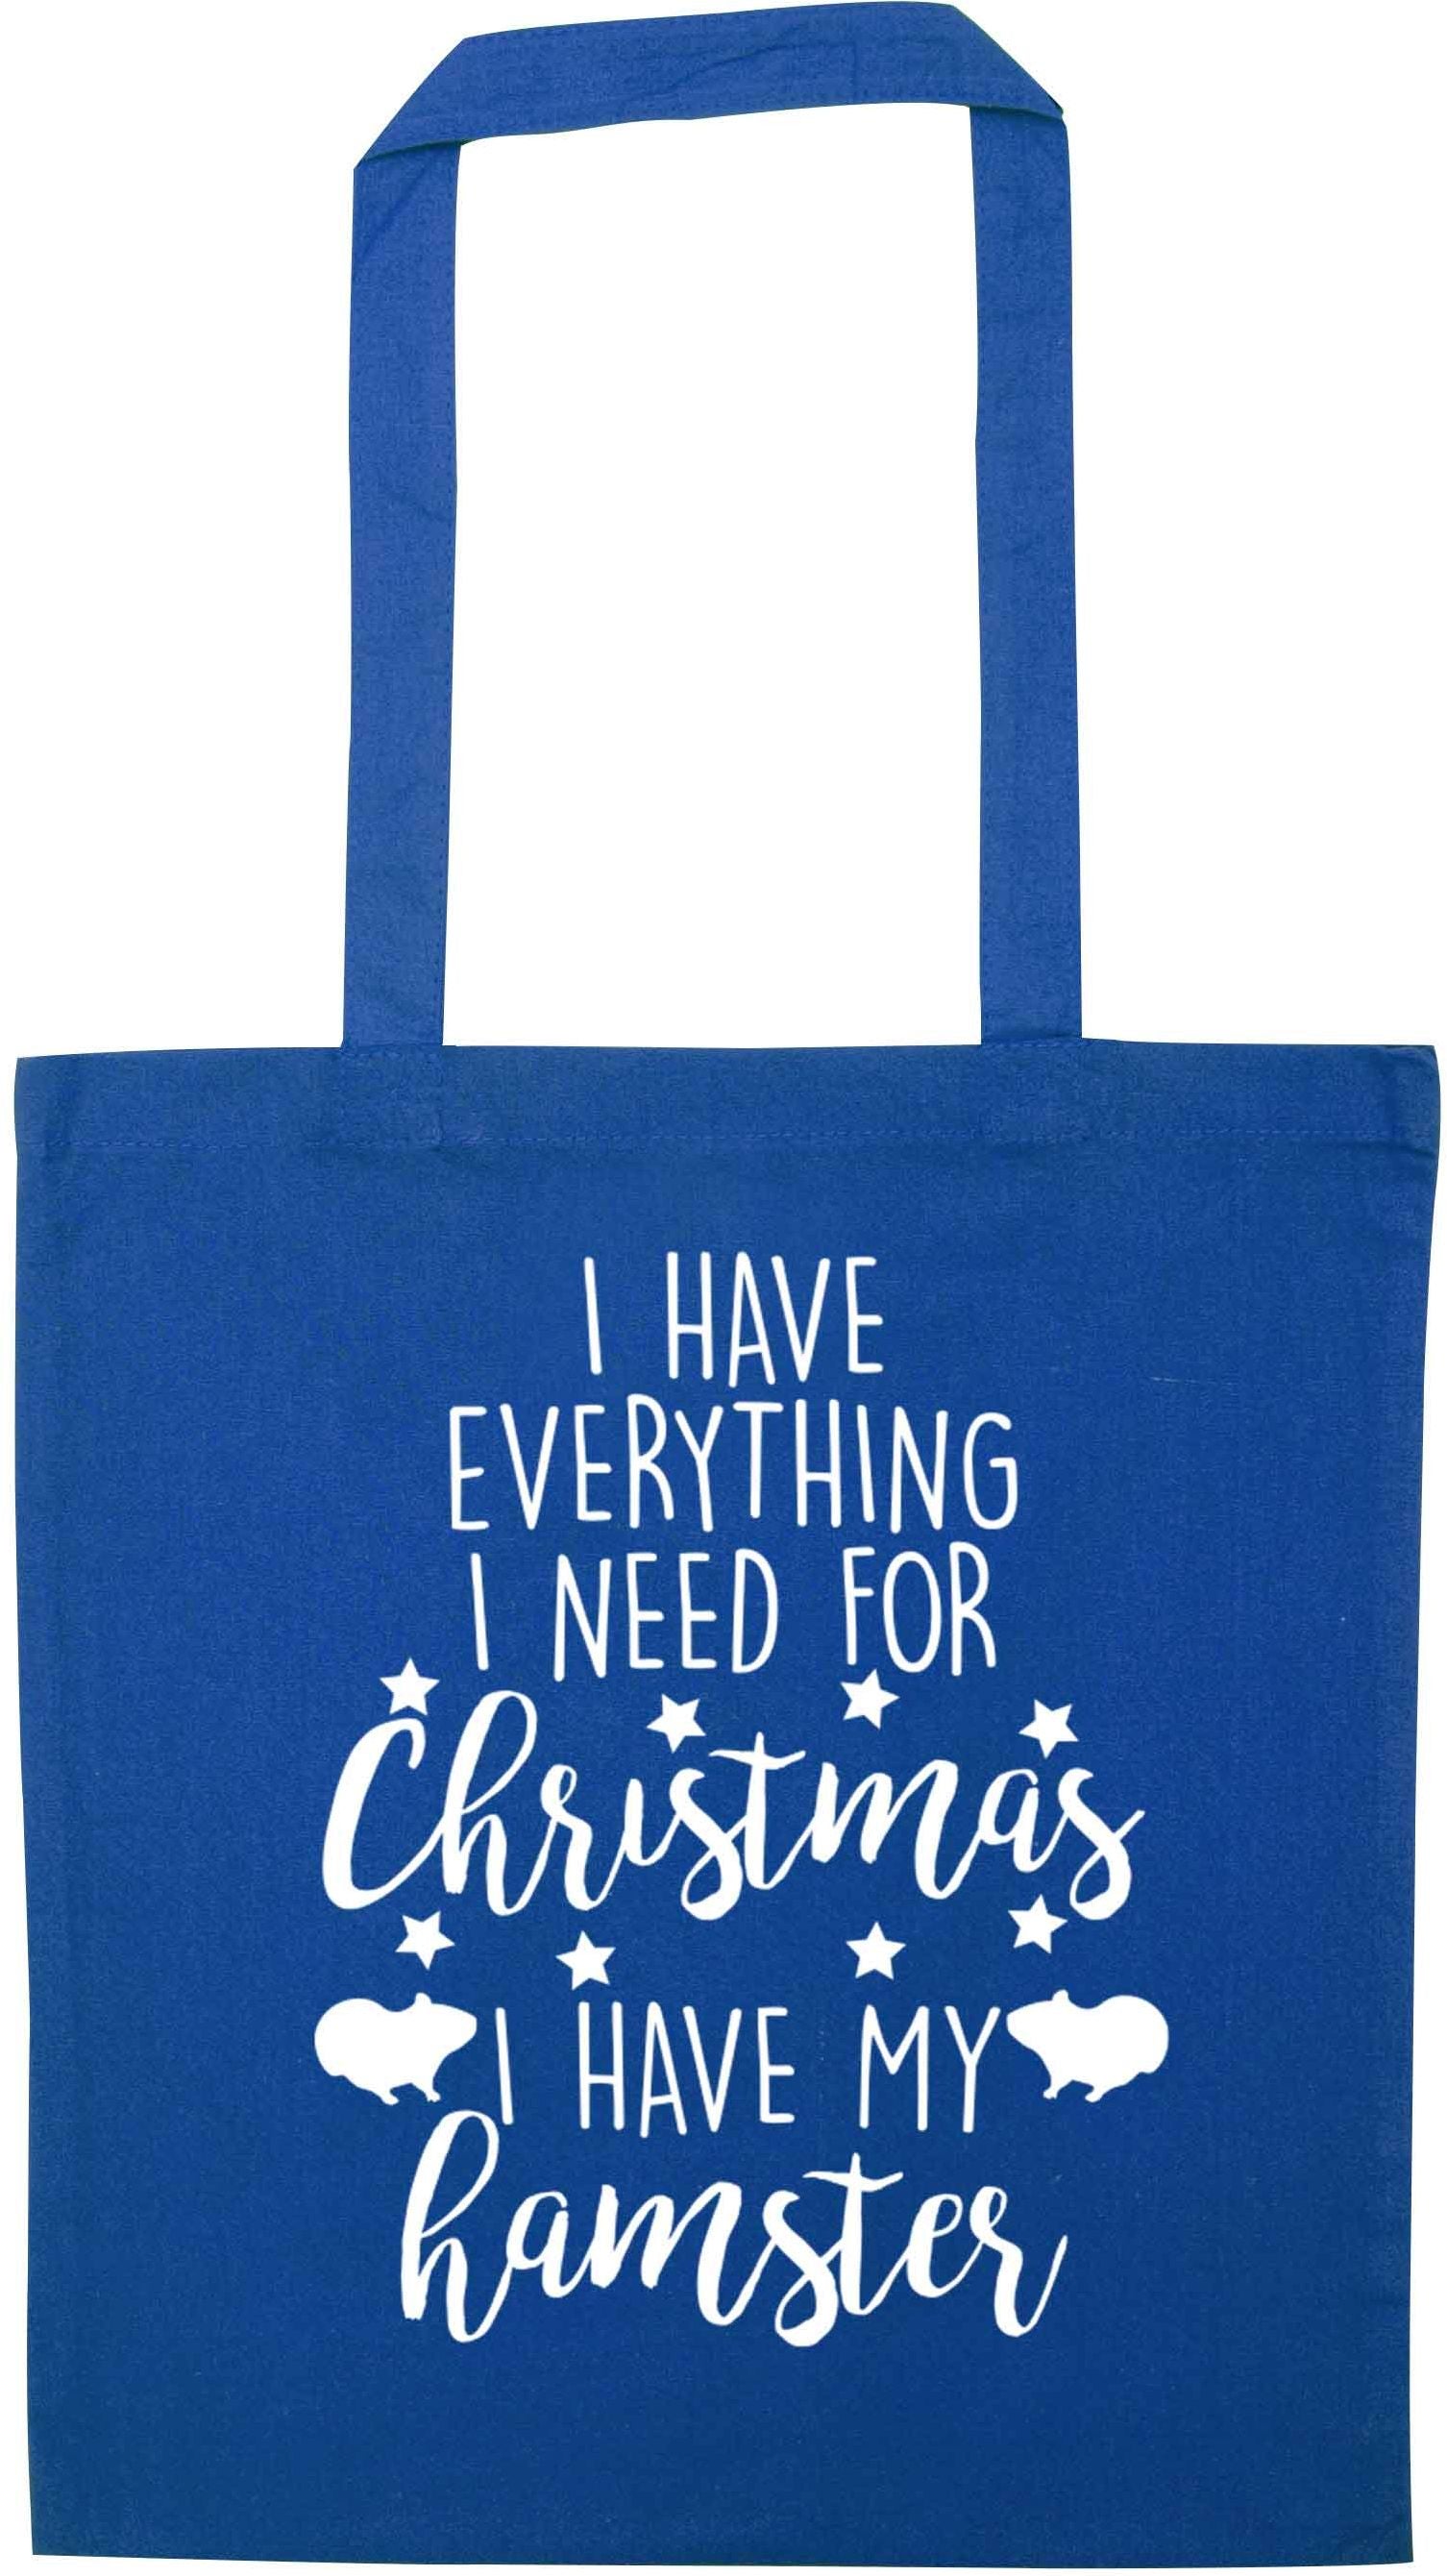 I have everything I need for Christmas I have my hamster blue tote bag